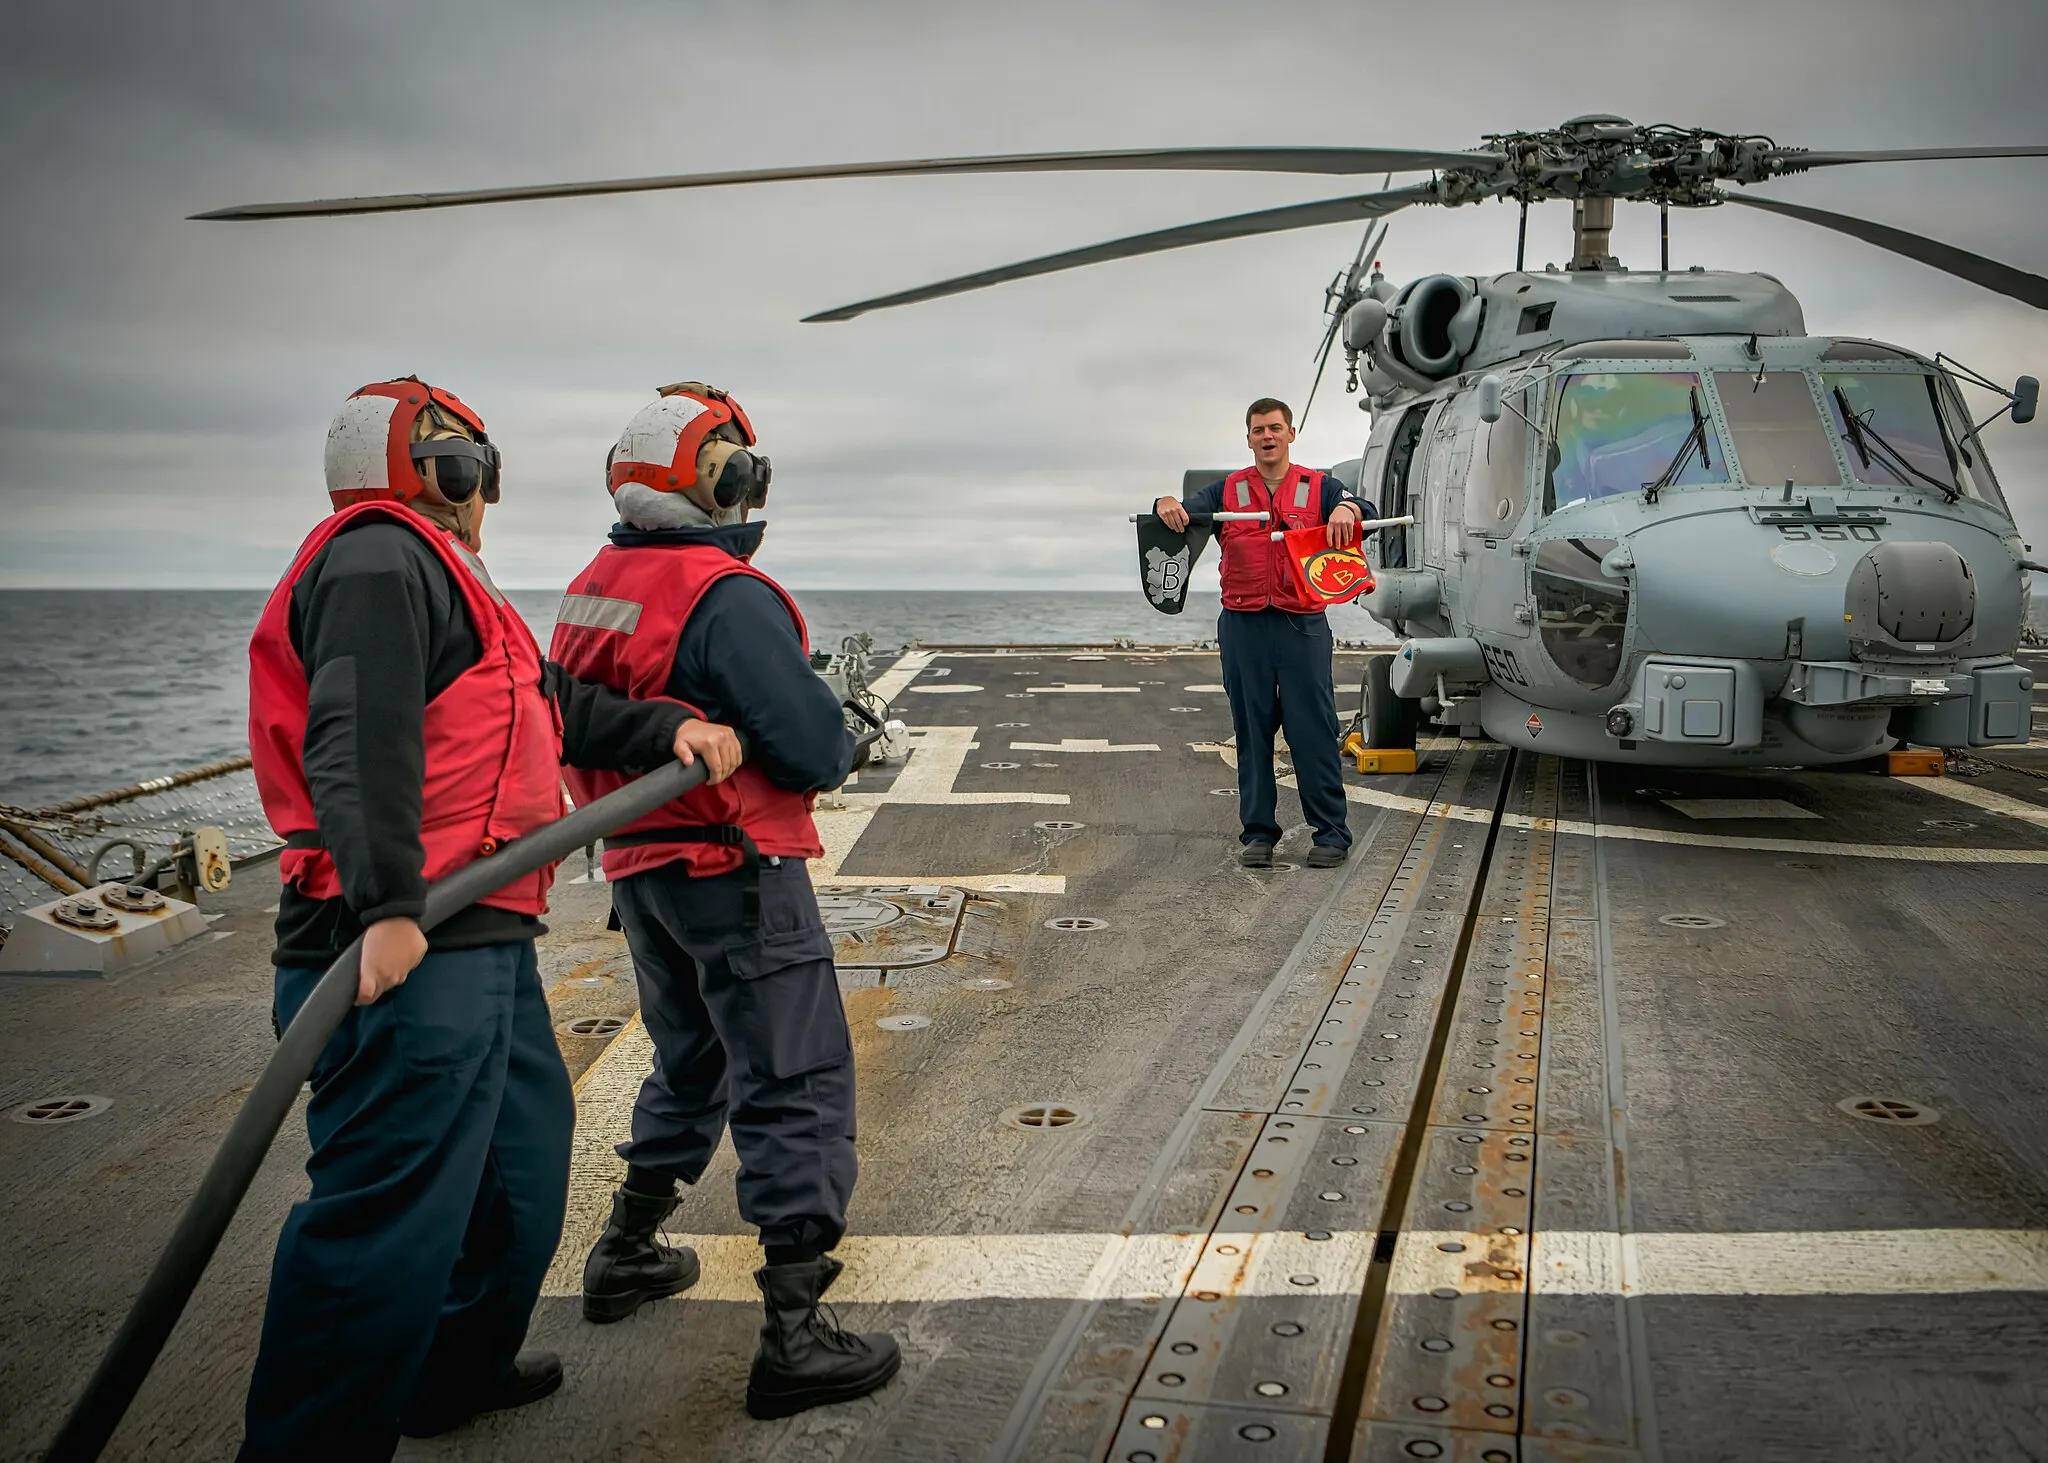 Photo showing: Machinery Repairman 1st Class Patrisha Castro (left)  and Damage Control 3rd Class Amber Blanks participate in a crash and salvage drill on The Arleigh Burke-class guided-missile destroyer USS Oscar Austin (DDG 79) during exercise Formidable Shield 2023 while operating in the North Atlantic Ocean, May 12, 2023. Formidable Shield is a biennial integrated air and missile defense (IAMD) exercise involving a series of live-fire events against subsonic, supersonic, and ballistic targets, incorporating multiple Allied ships, aircraft, and ground forces working across battlespaces to deliver effects. (U.S. Air Force photo by Senior Airman Jan K. Valle)